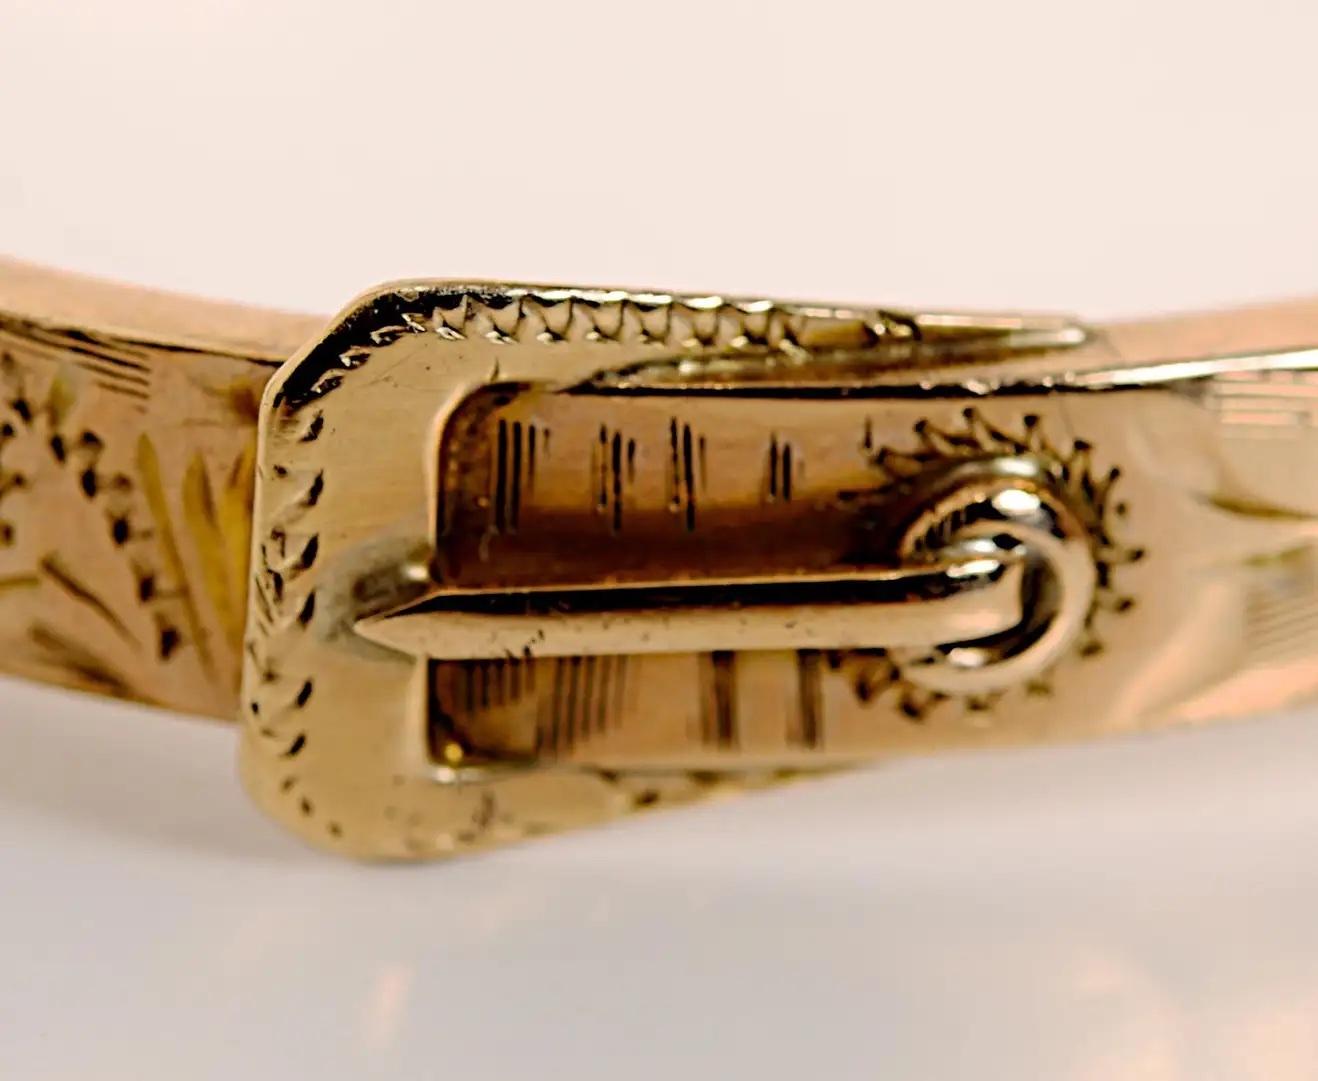 Victorian Child's Buckle Belt Bracelet c1880 in 14K Yellow Gold. Beautifully modeled and detailed classic. Jewelry designed for young children, especially antique one's are rare because young children did not take the best care of them. This buckle